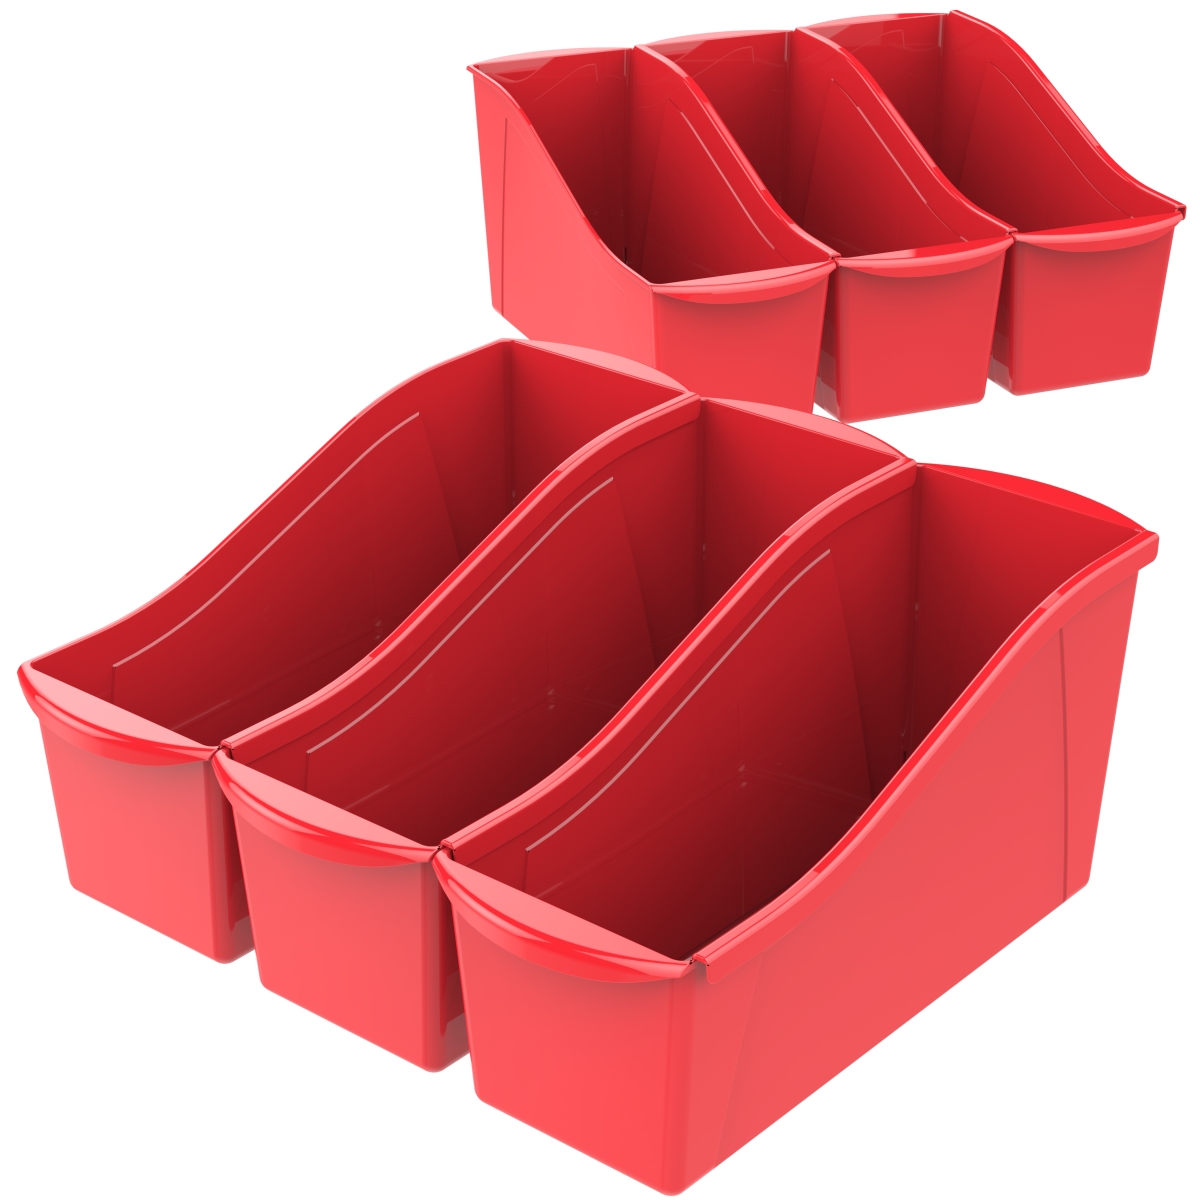 Picture of Storex 71102U06C Large Book Bin, Red - Pack of 6